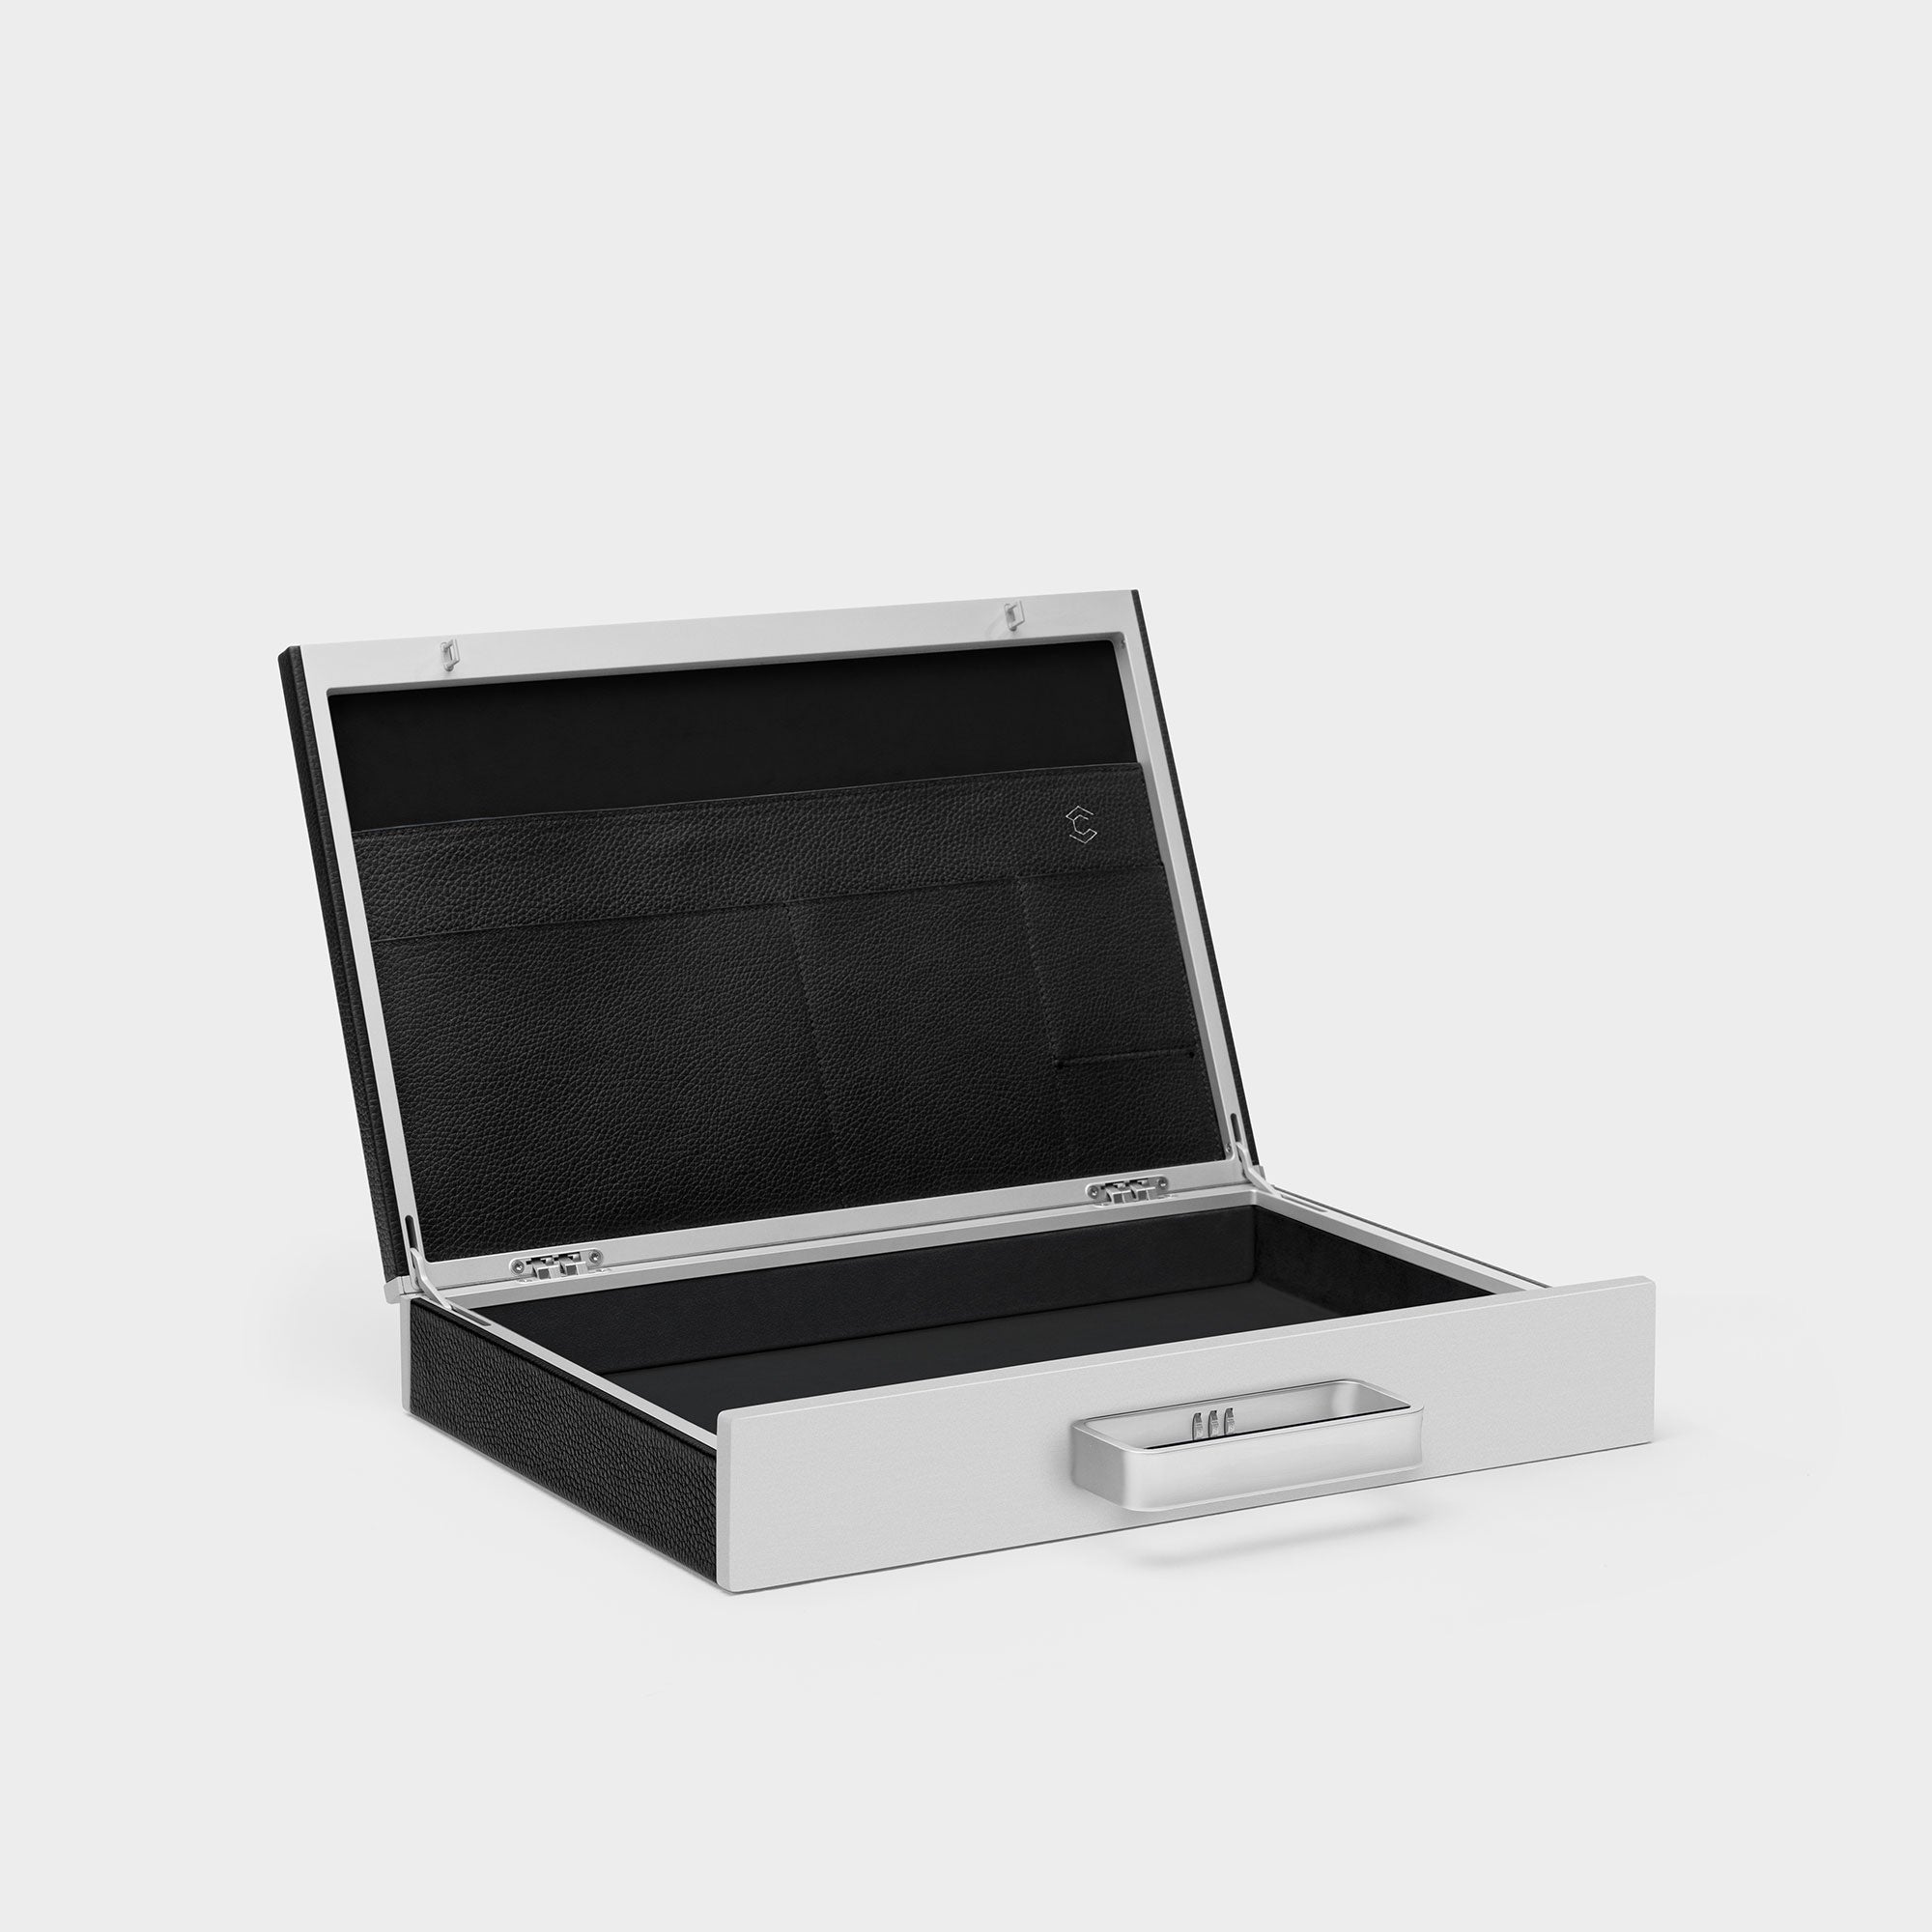 Product photo of open Mackenzie Briefcase in black and grey showcasing the luxury briefcase's interior leather storage compartments